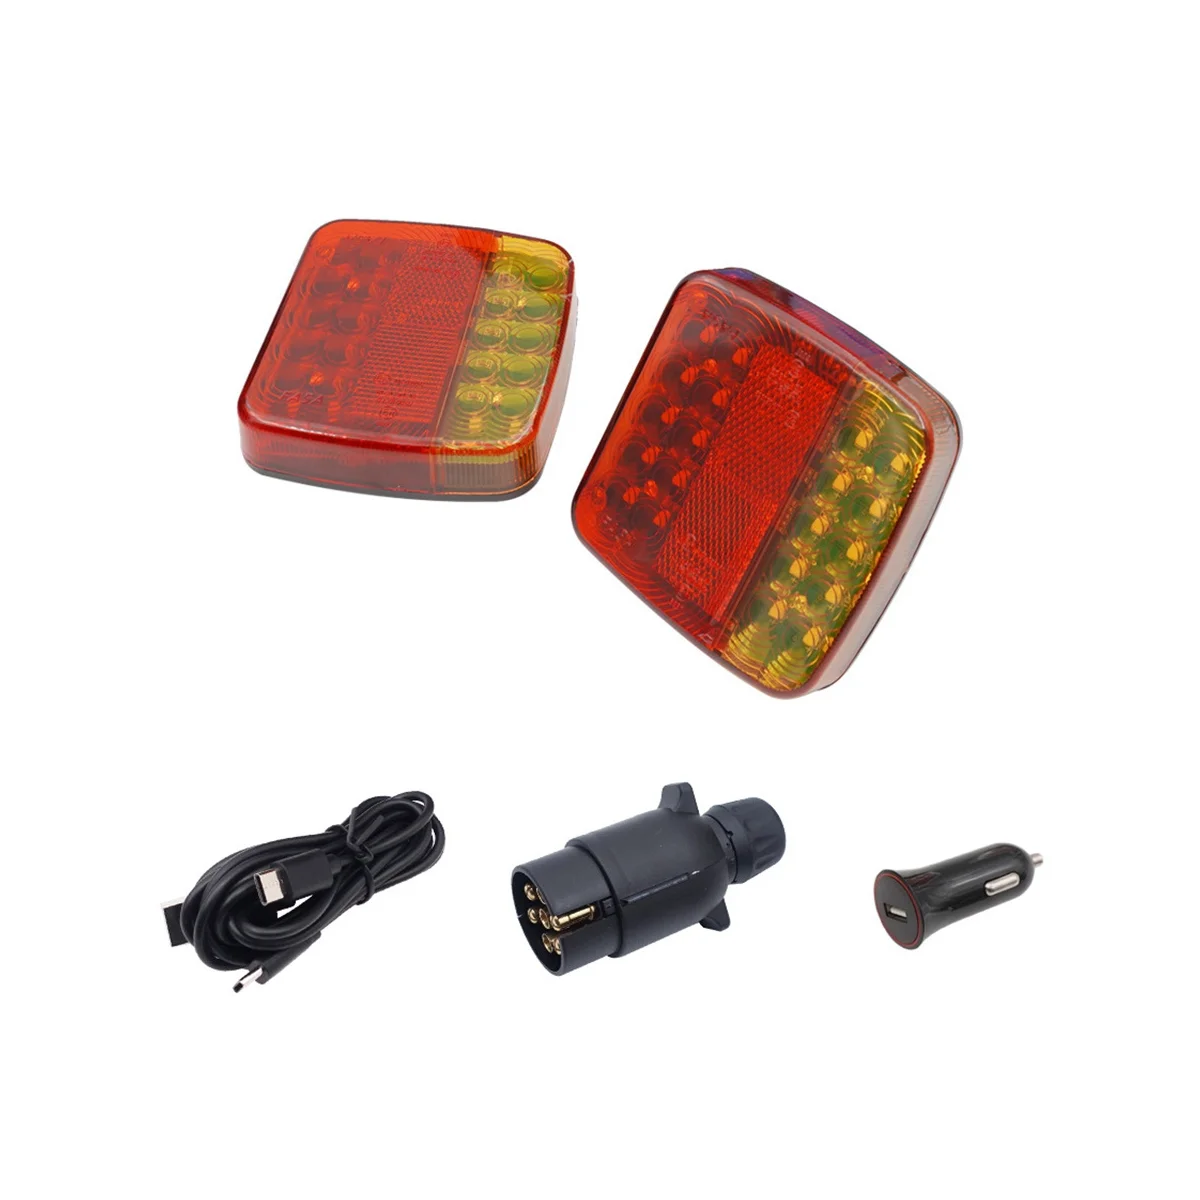 

Wireless Trailer Lights Kit for Towing Truck, Rechargeable LED Tow Light with Magnetic for Boat Trailer RV